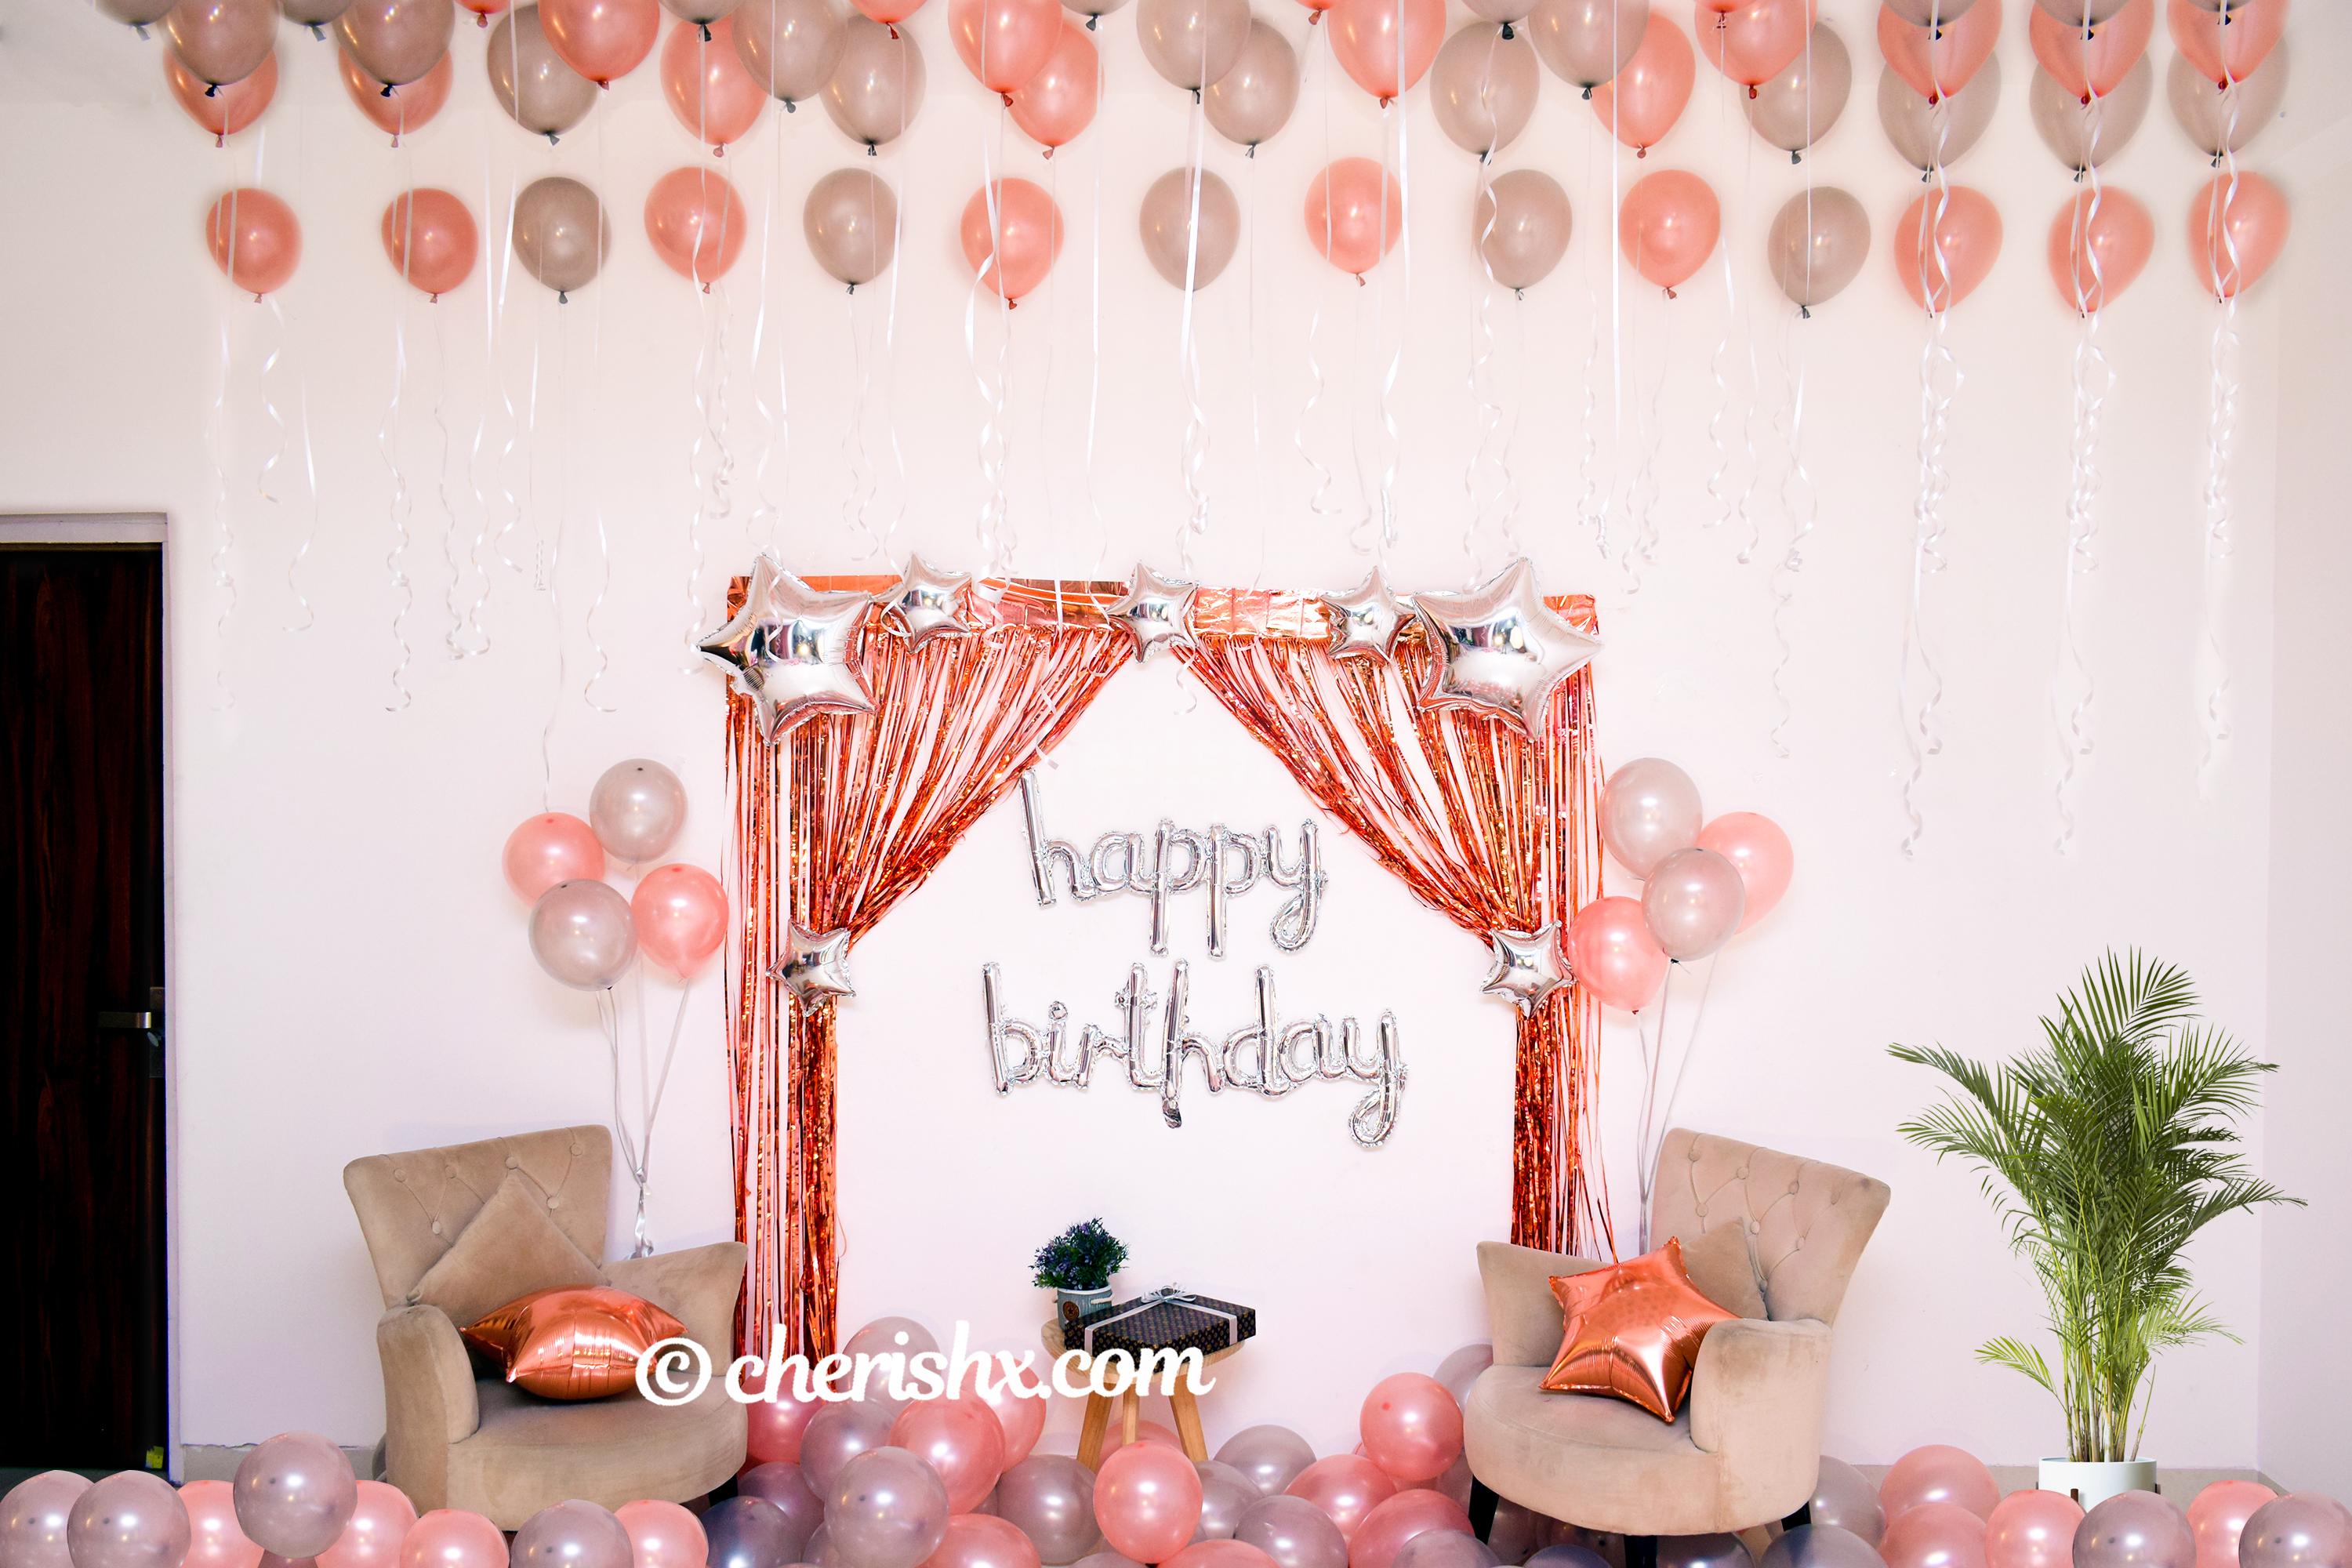 Surprise your loved one with CherishX's Happy Birthday Rose Gold Surprise Decor.